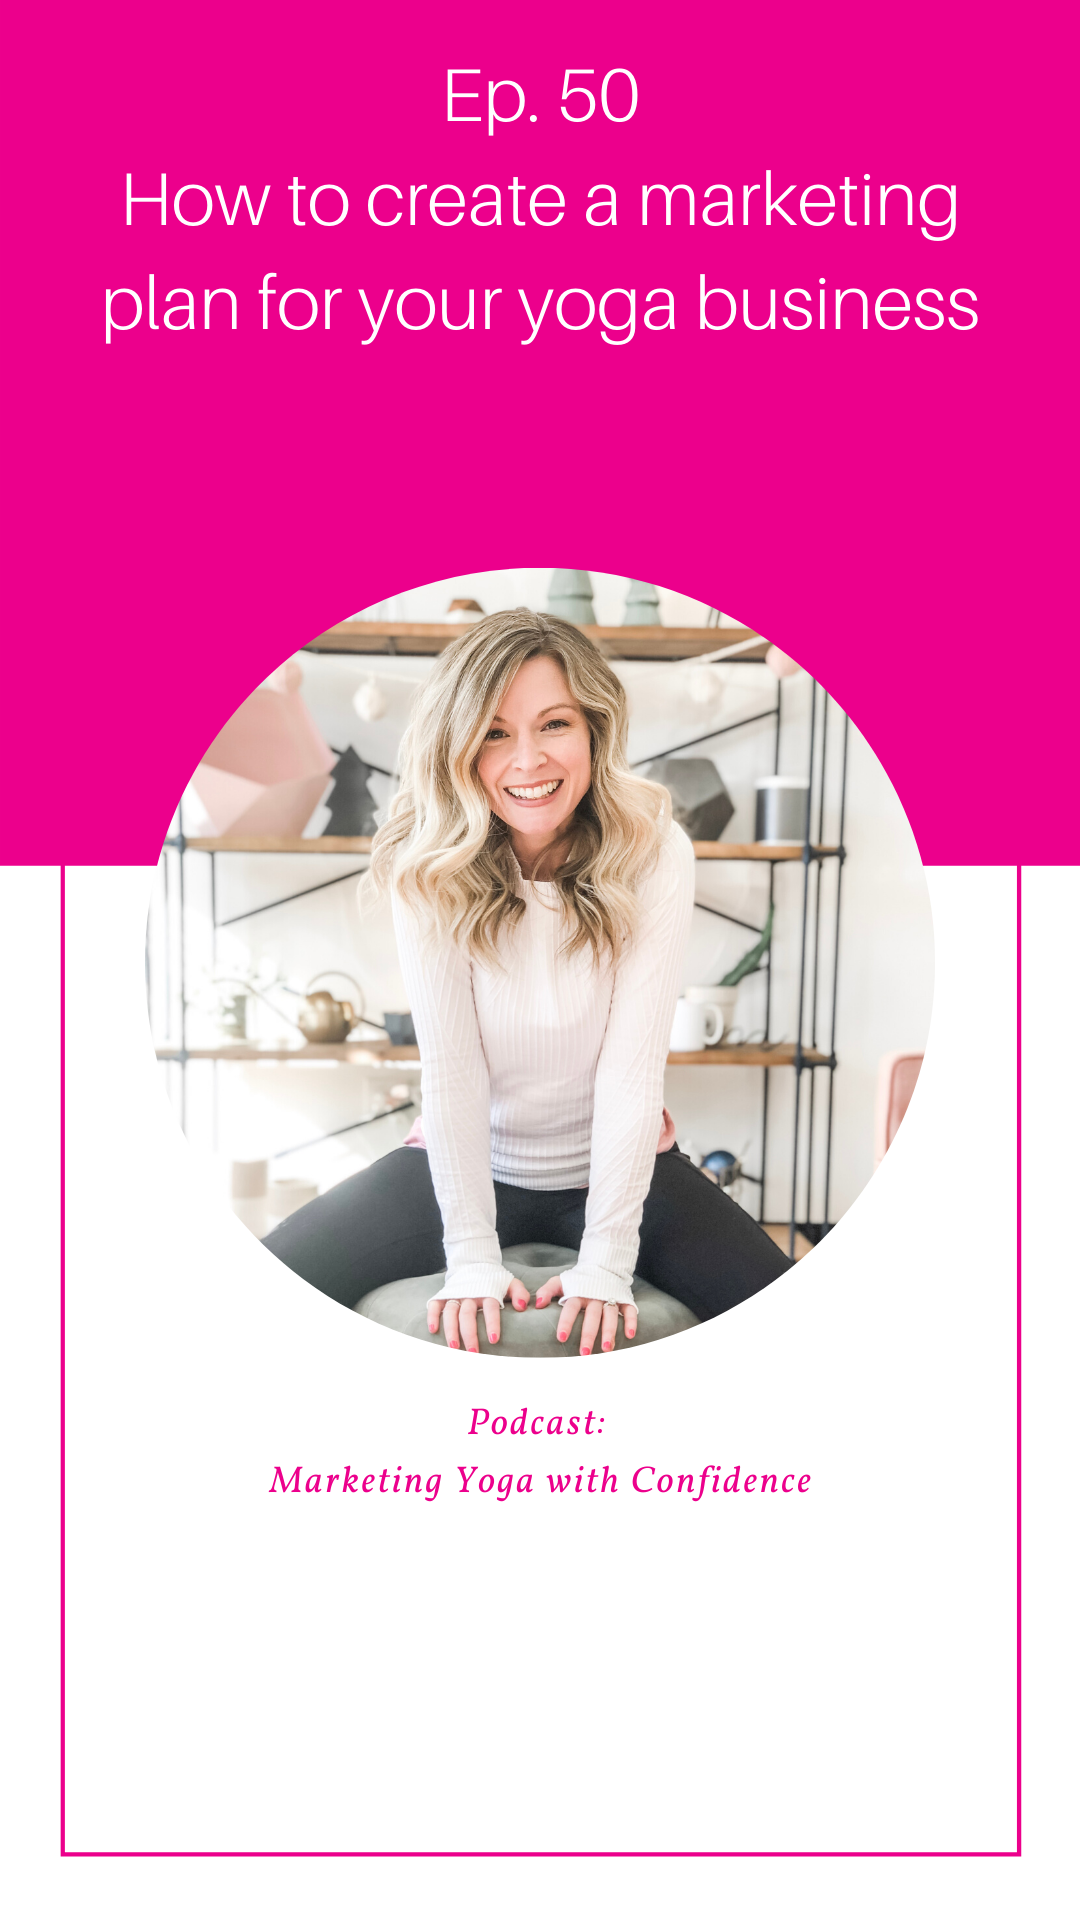 How to create a marketing plan for your yoga business